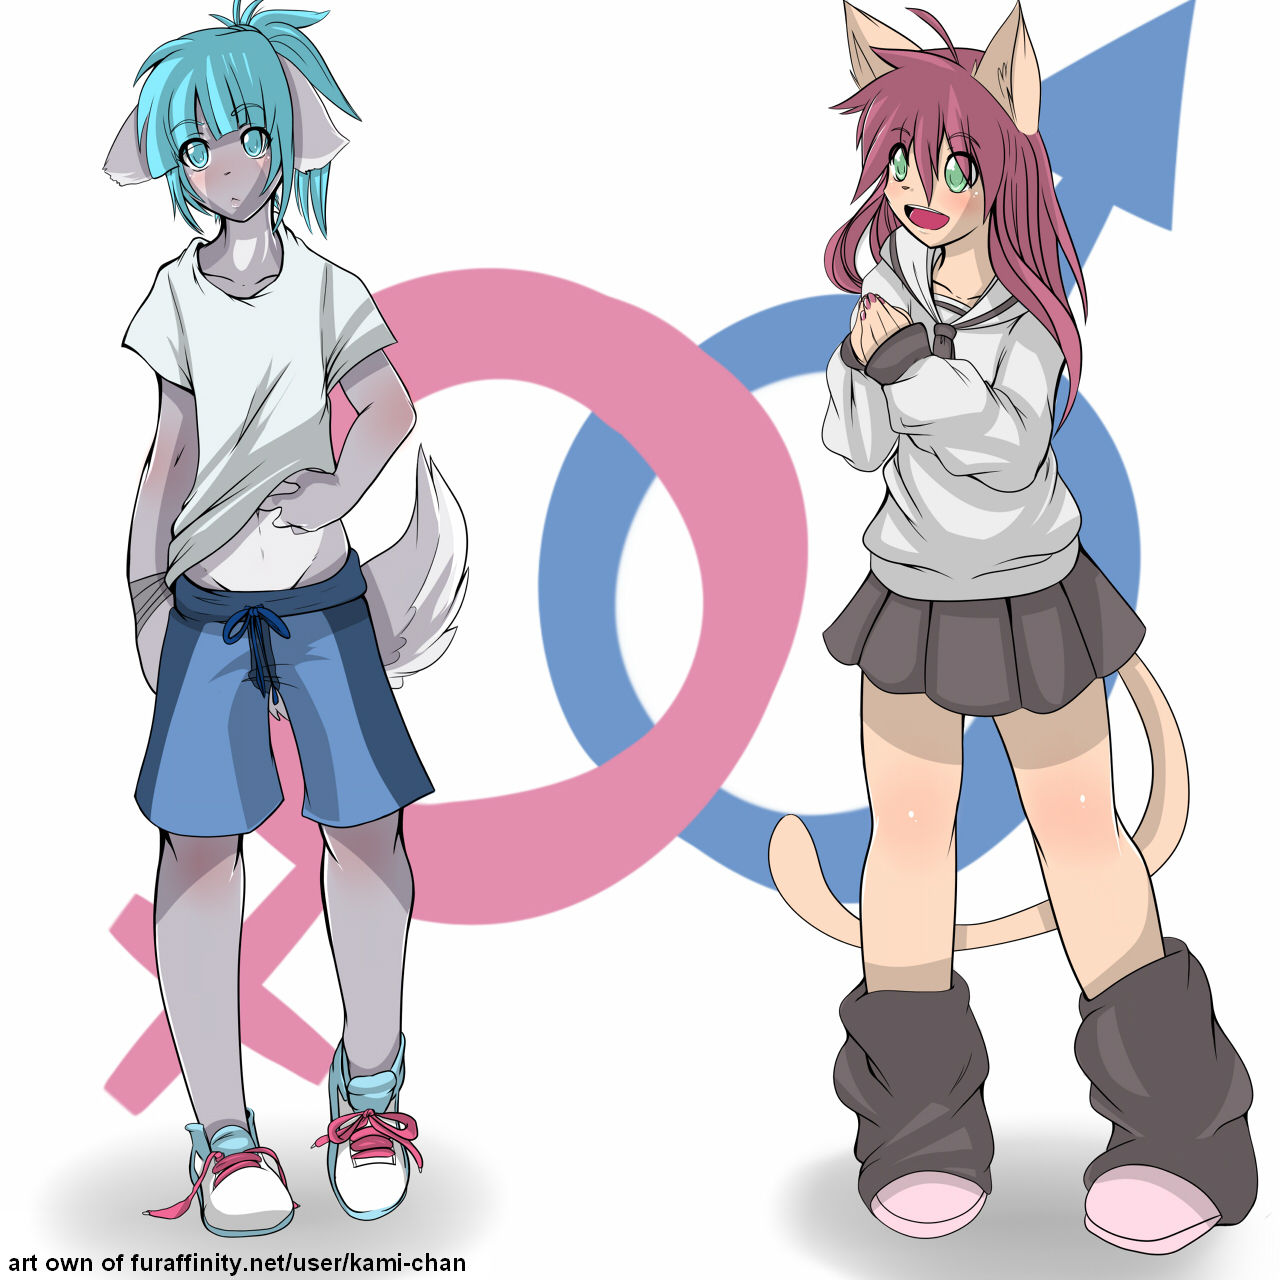 Tomboy x Femboy. How do you feel about that?